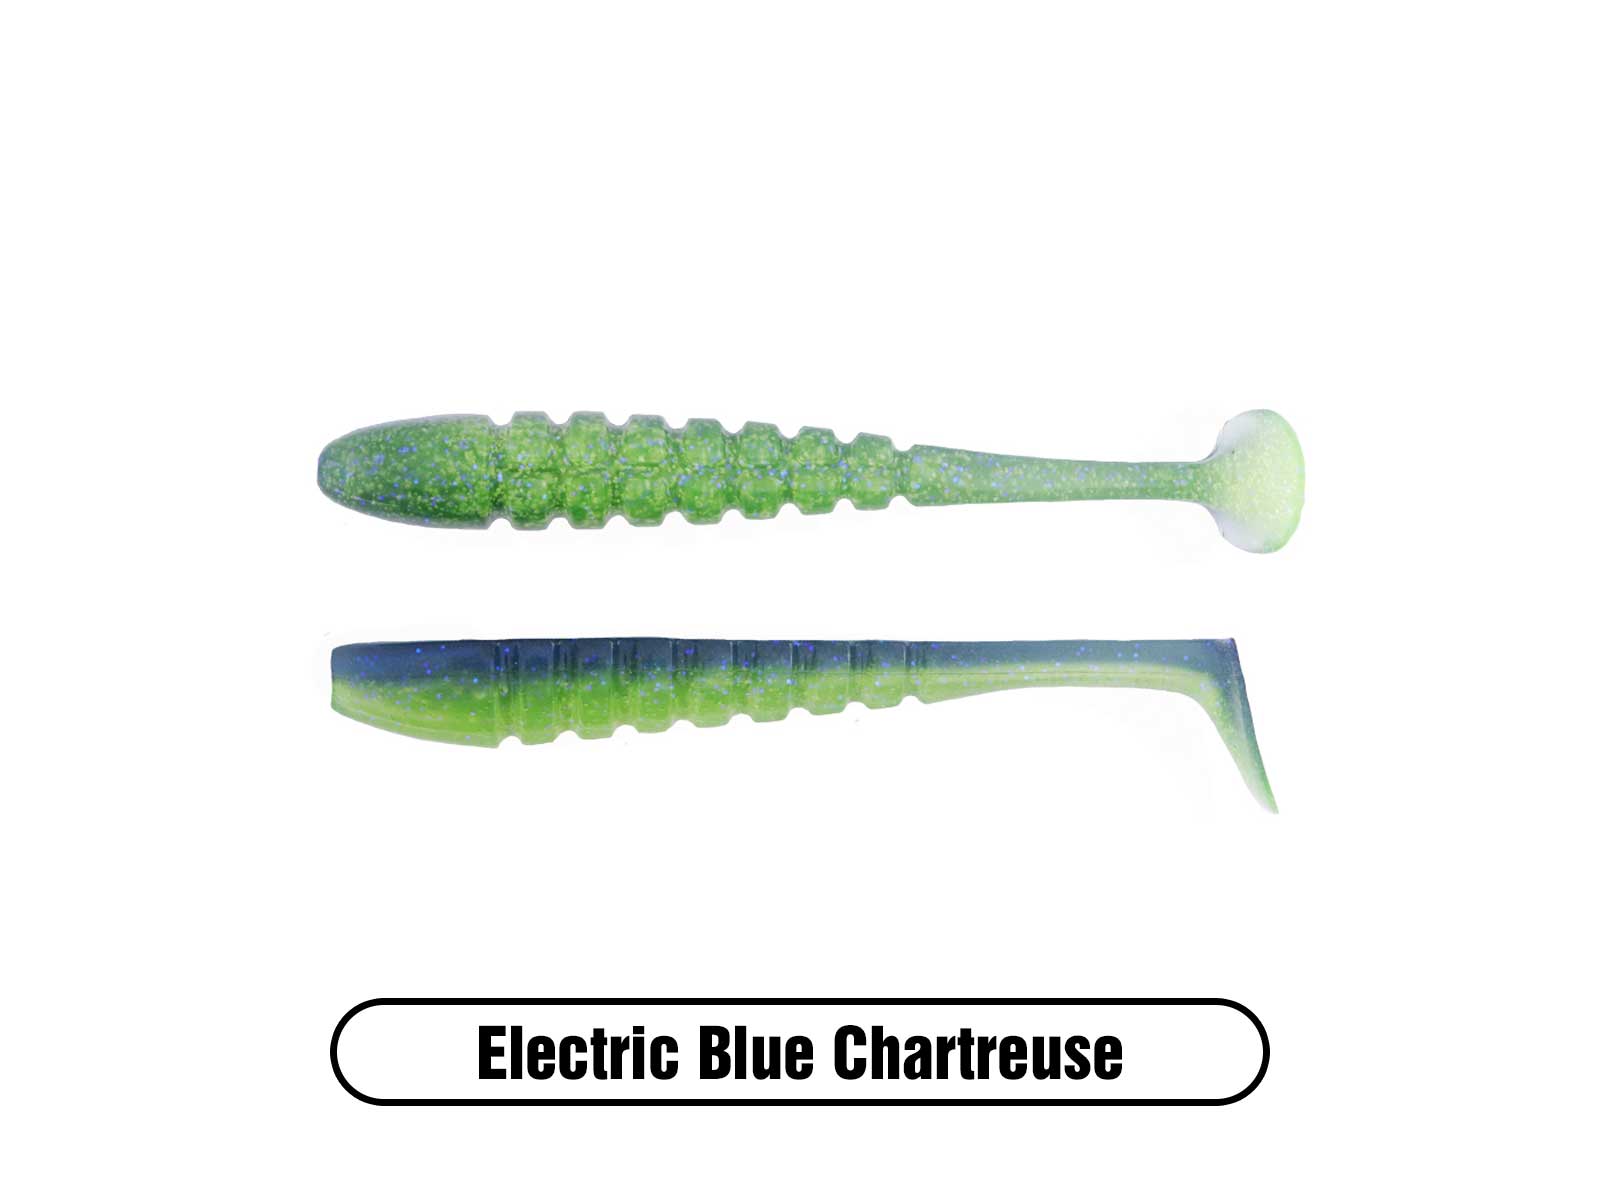 4.75" Swammer Swimbait Electric Blue Chartreuse